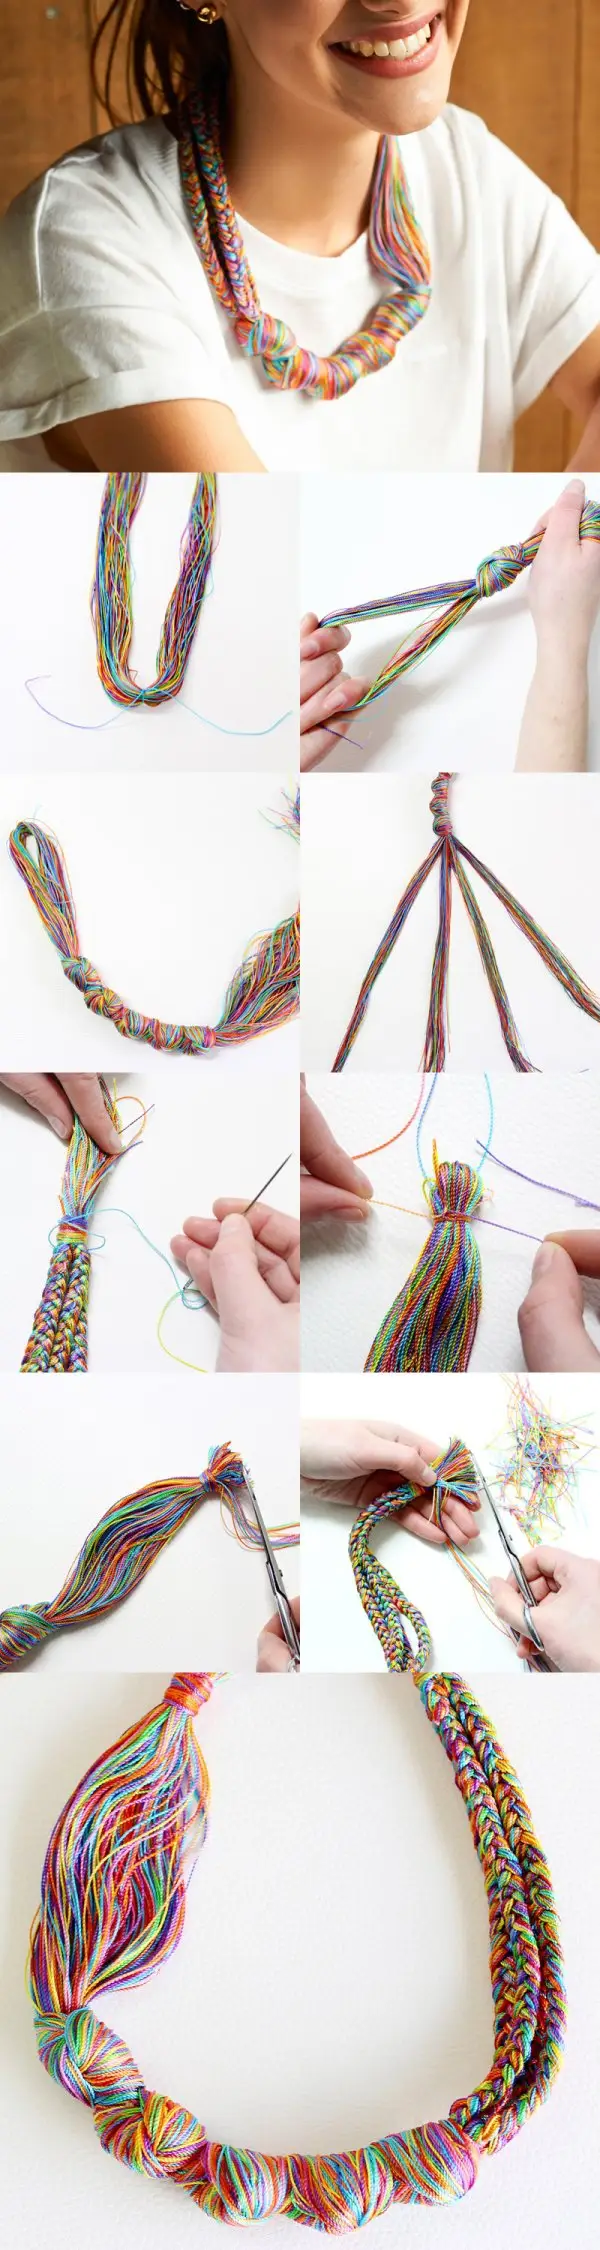 30 Amazing DIY Bracelets You Have to Check out